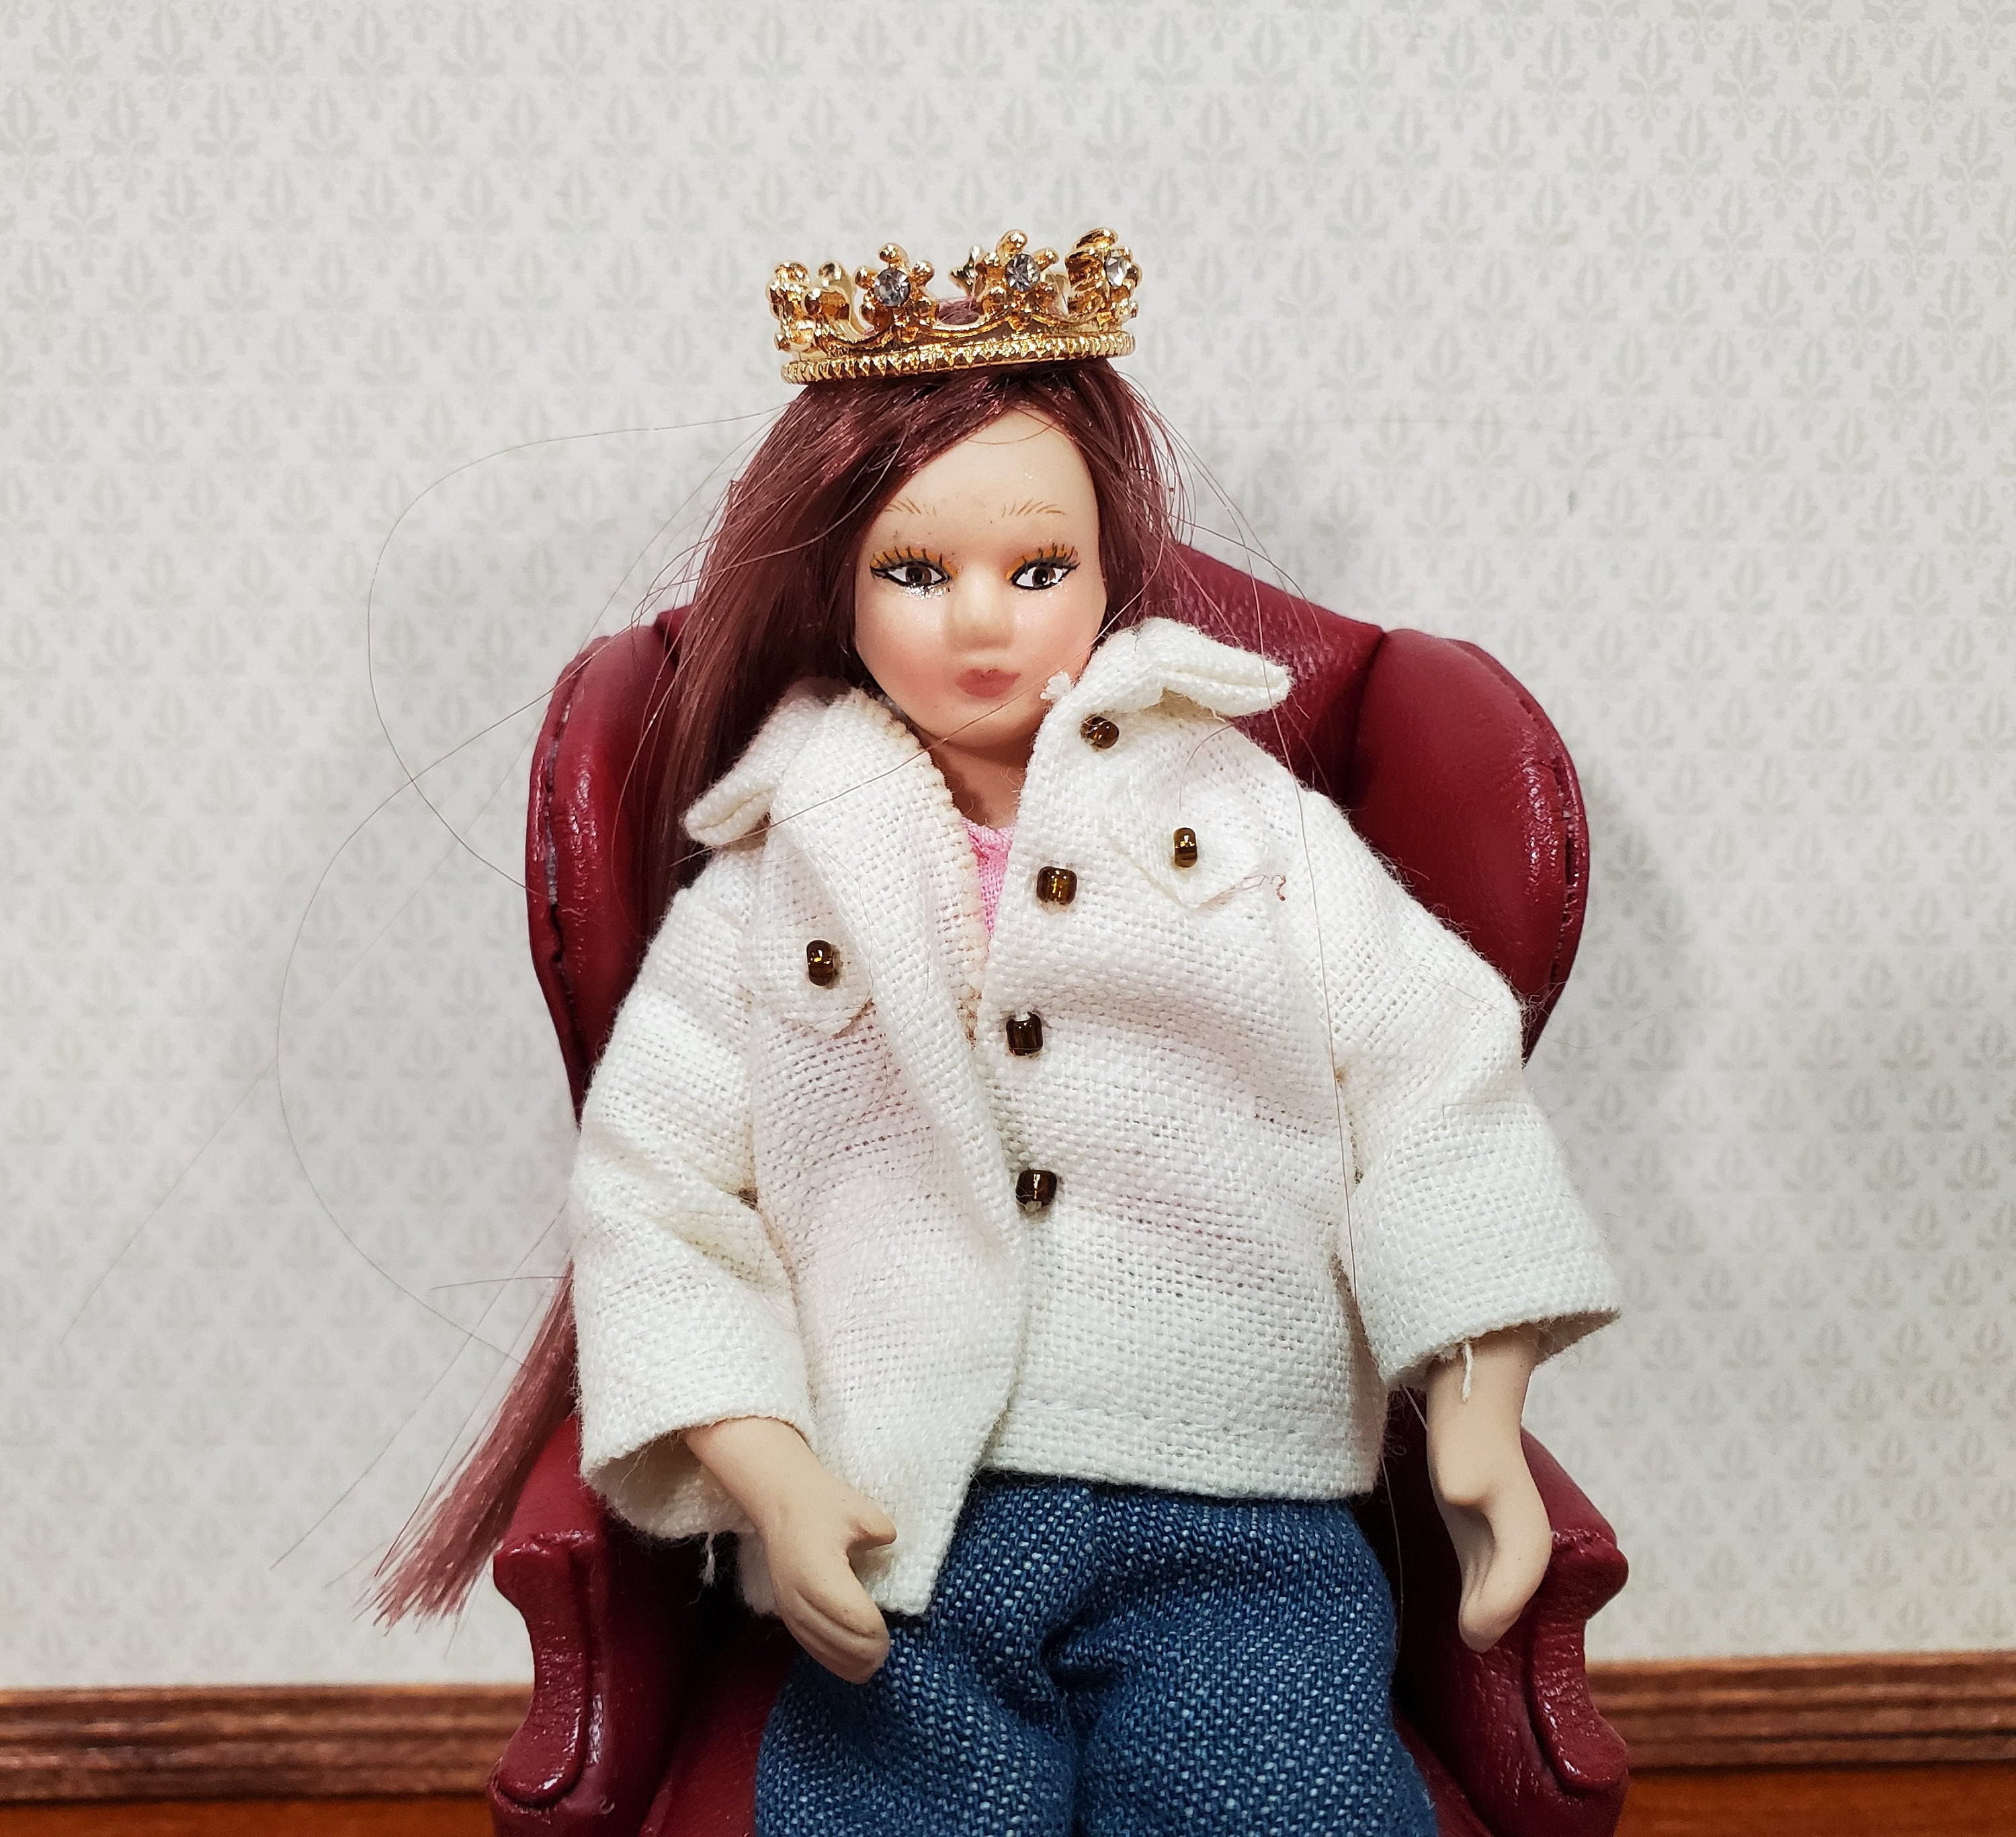 Tiny Crown Mini Doll House or Jewelry Finding (Choose a Color